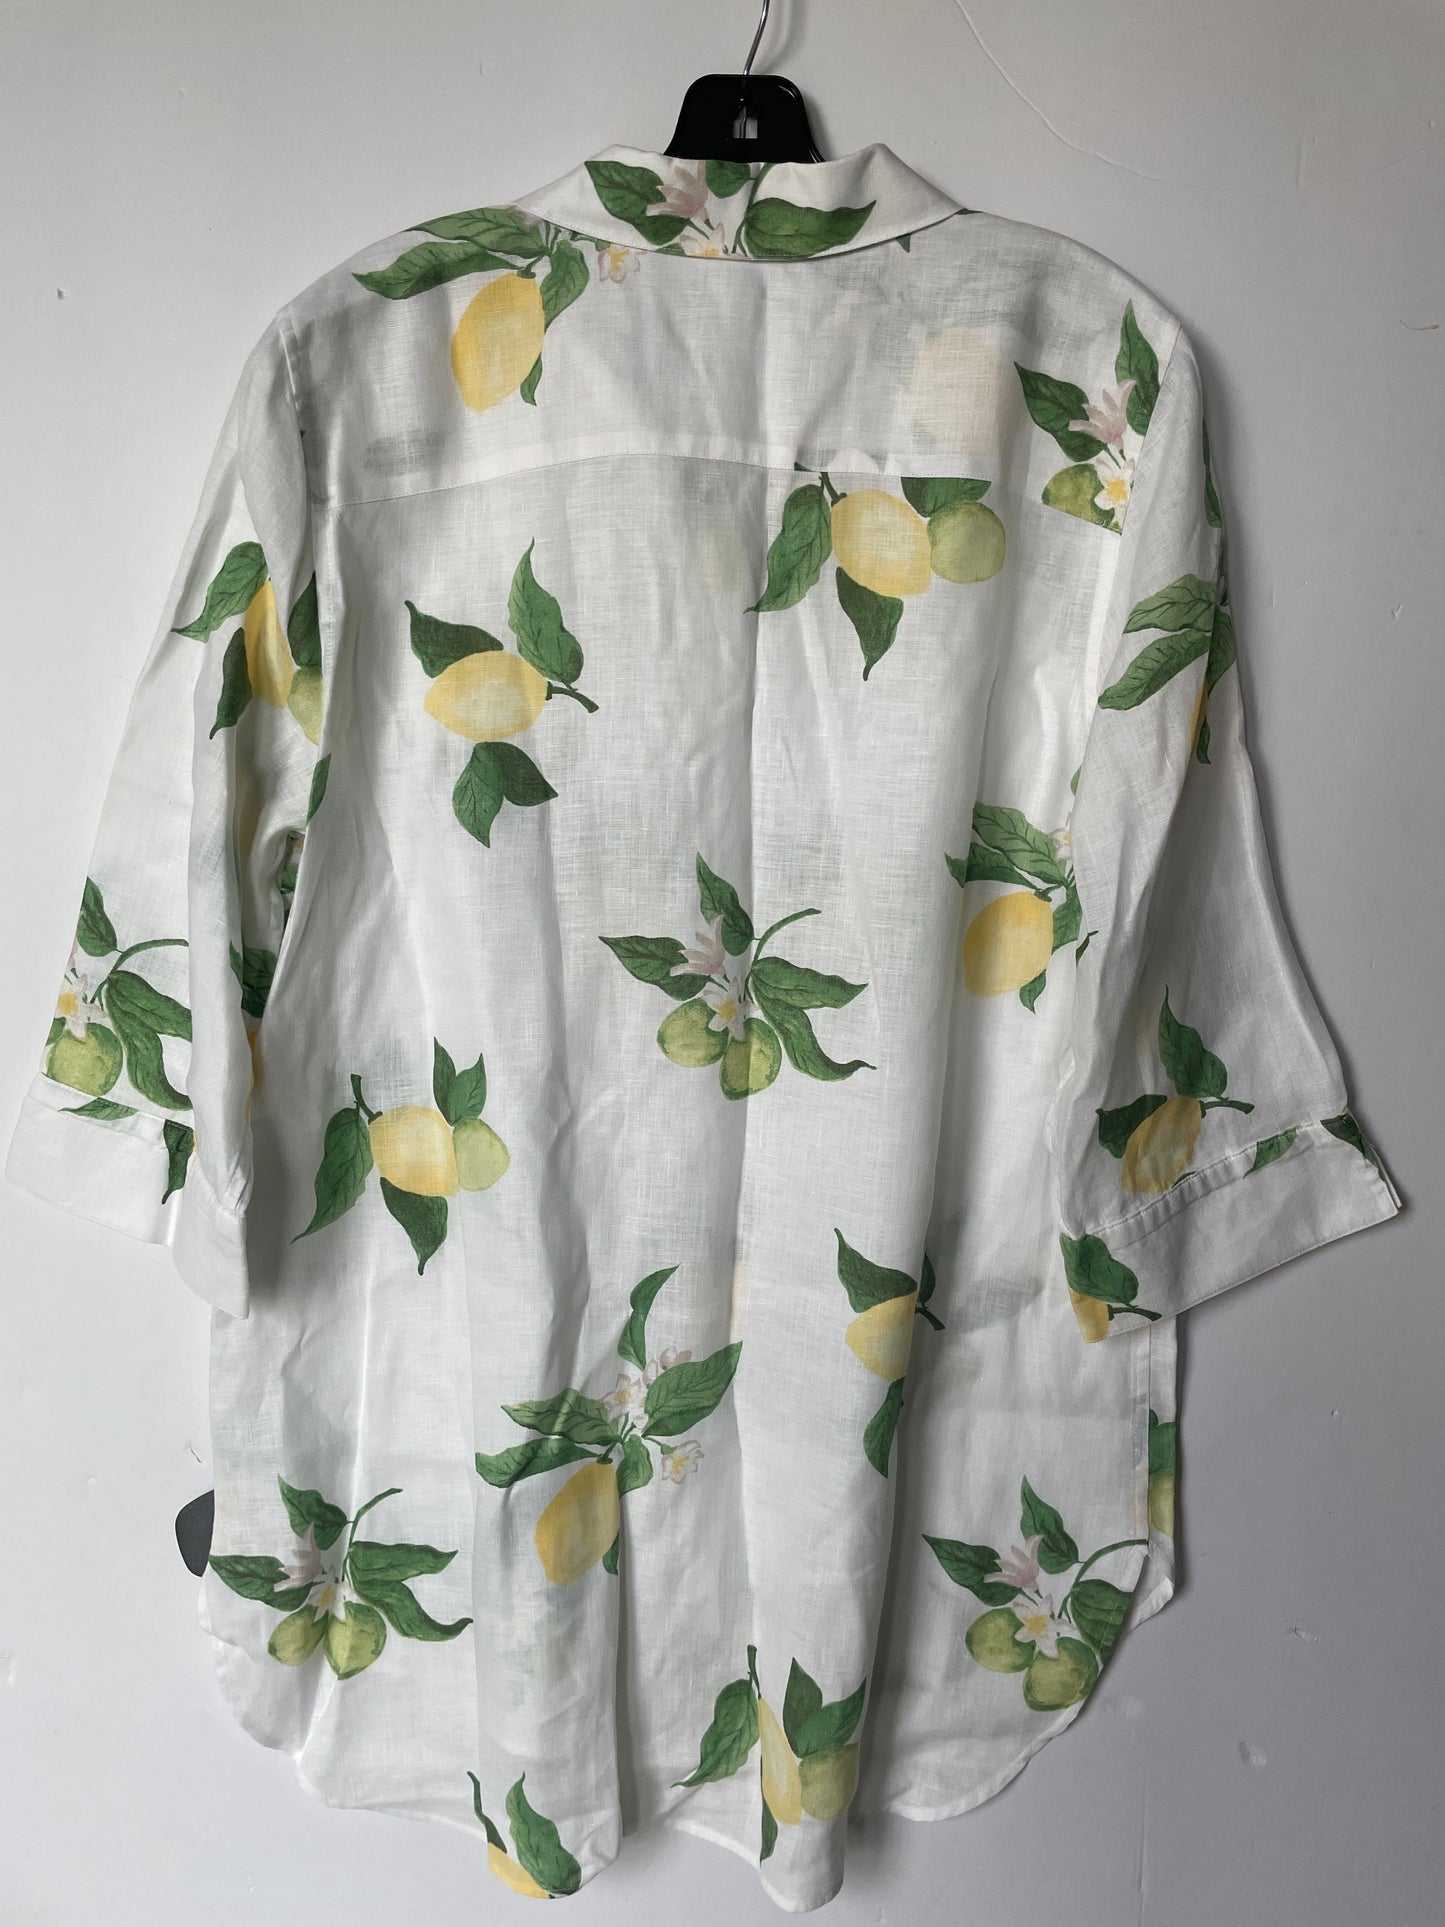 White Top Short Sleeve Chicos, Size L